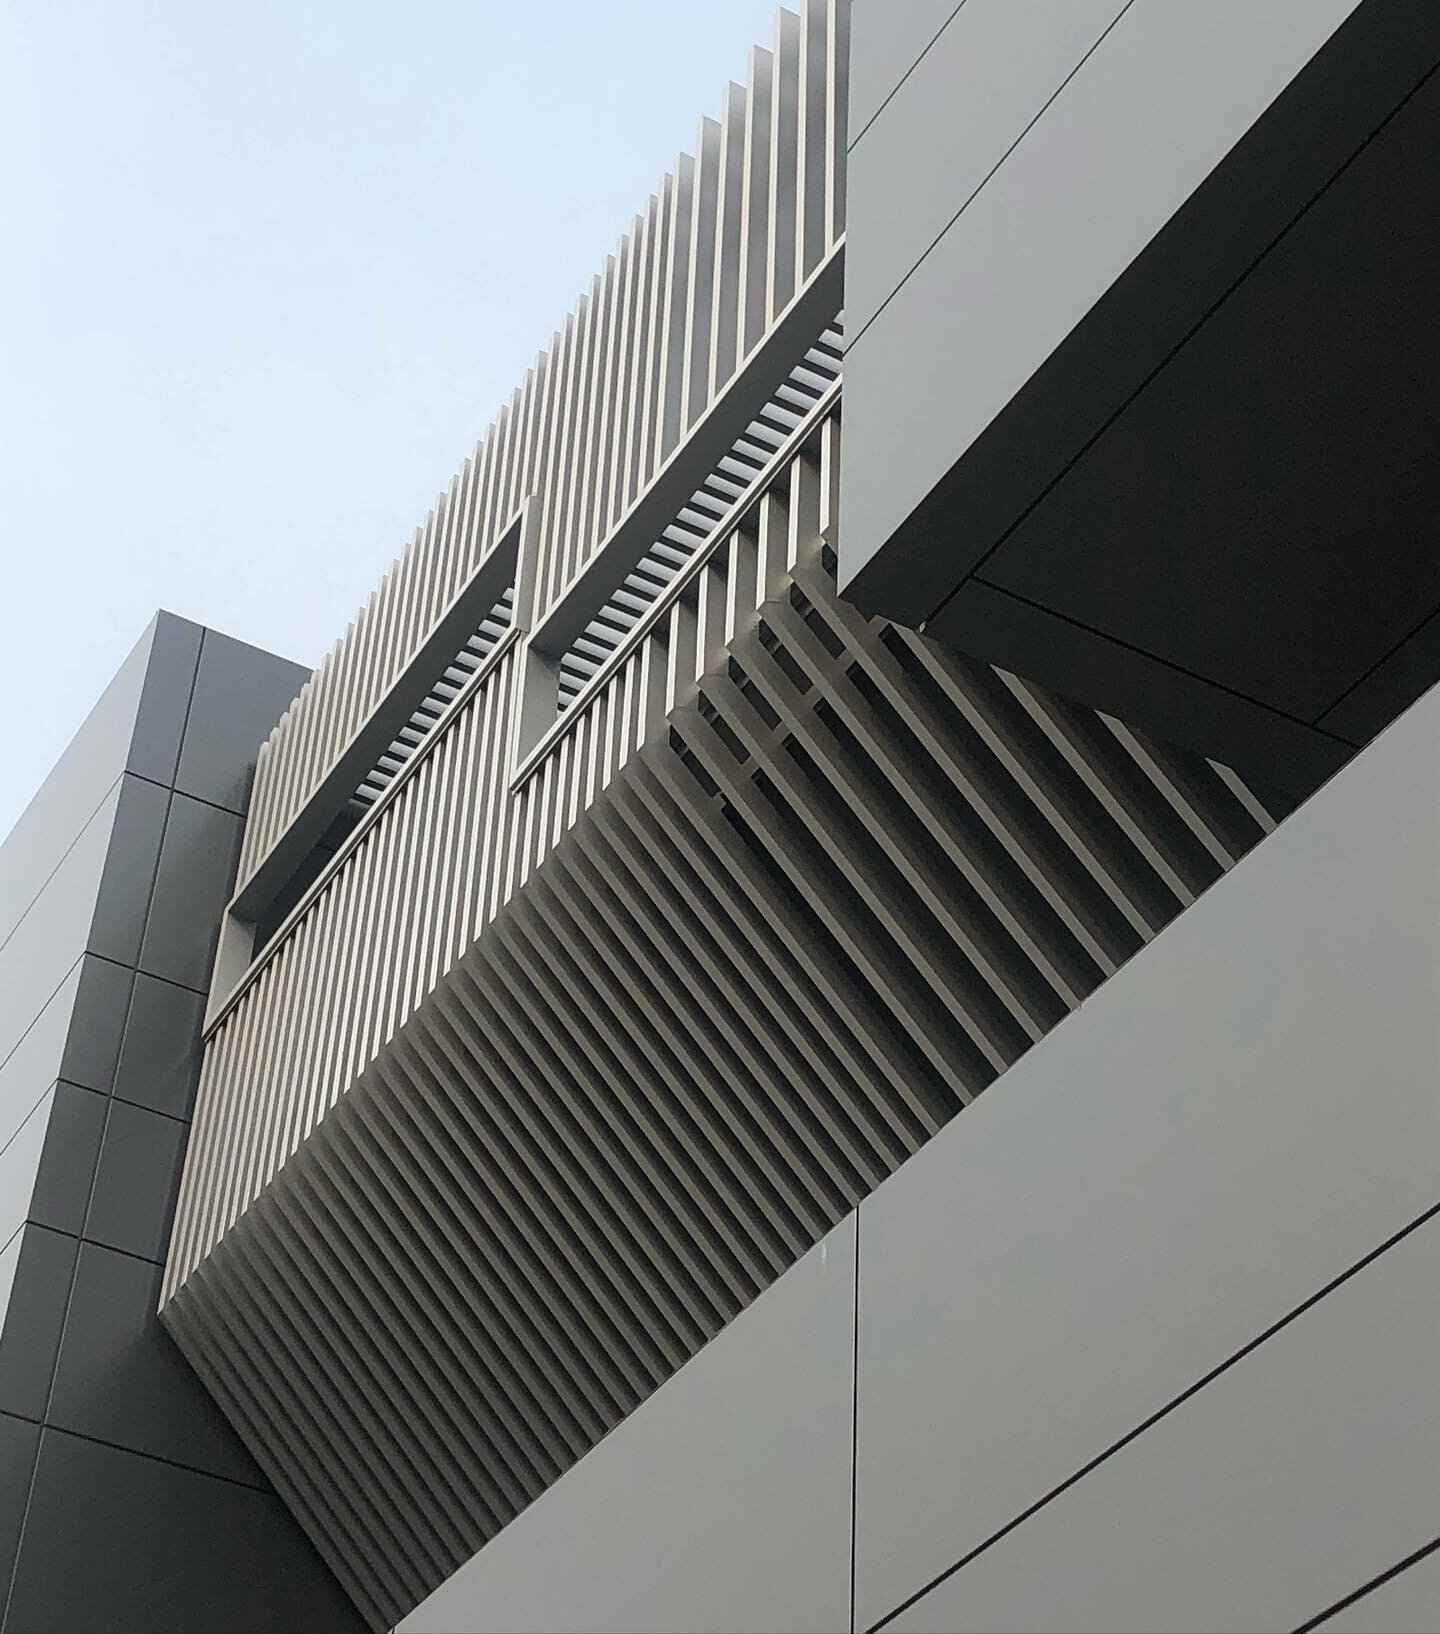 Fabricated and installed Aluminum tube facade on this commercial building in Torrance, CA.  We installed horizontal mounting rails and individually mounted every vertical tube.  All angle transitions were welded and ground smooth and finished with an